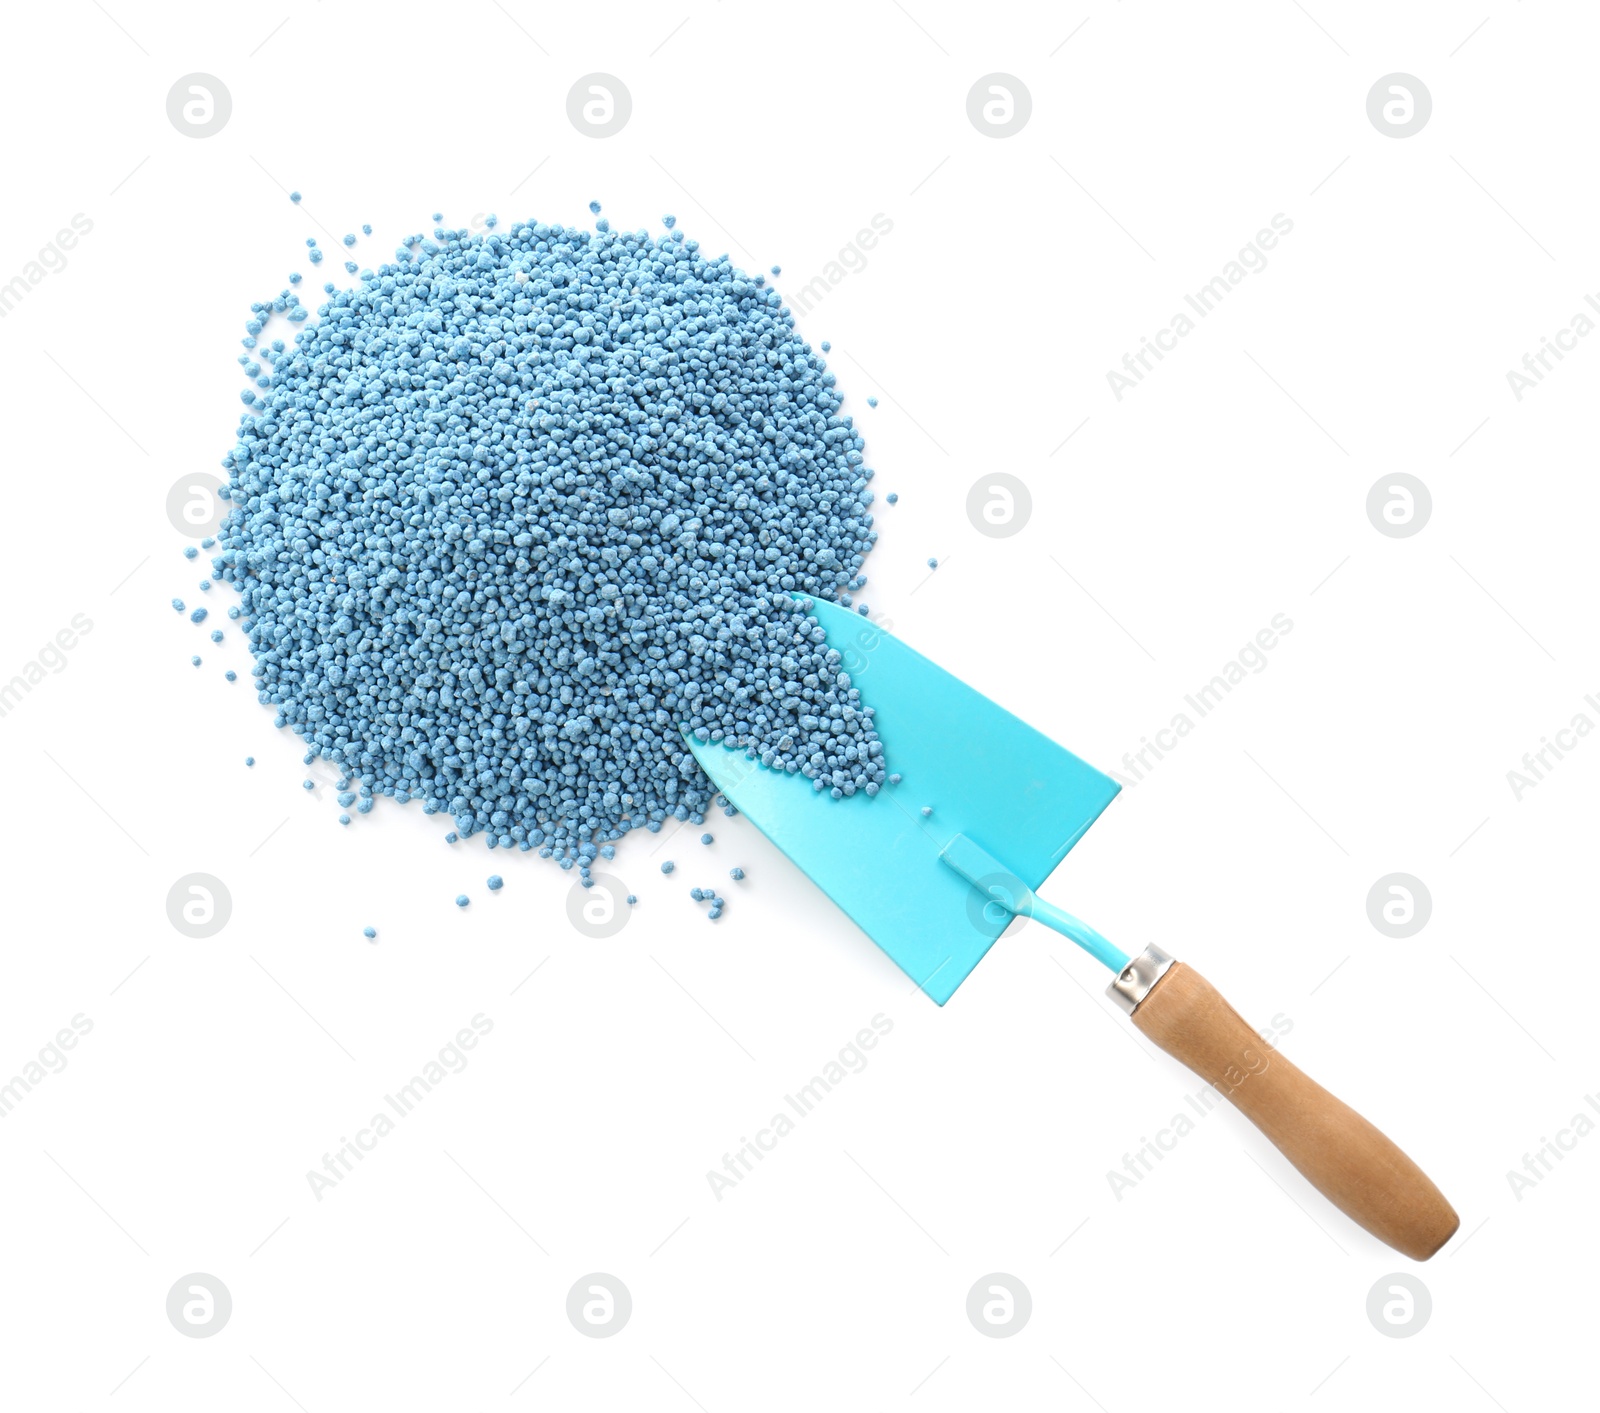 Photo of Pile of granular mineral fertilizer and shovel on white background, top view